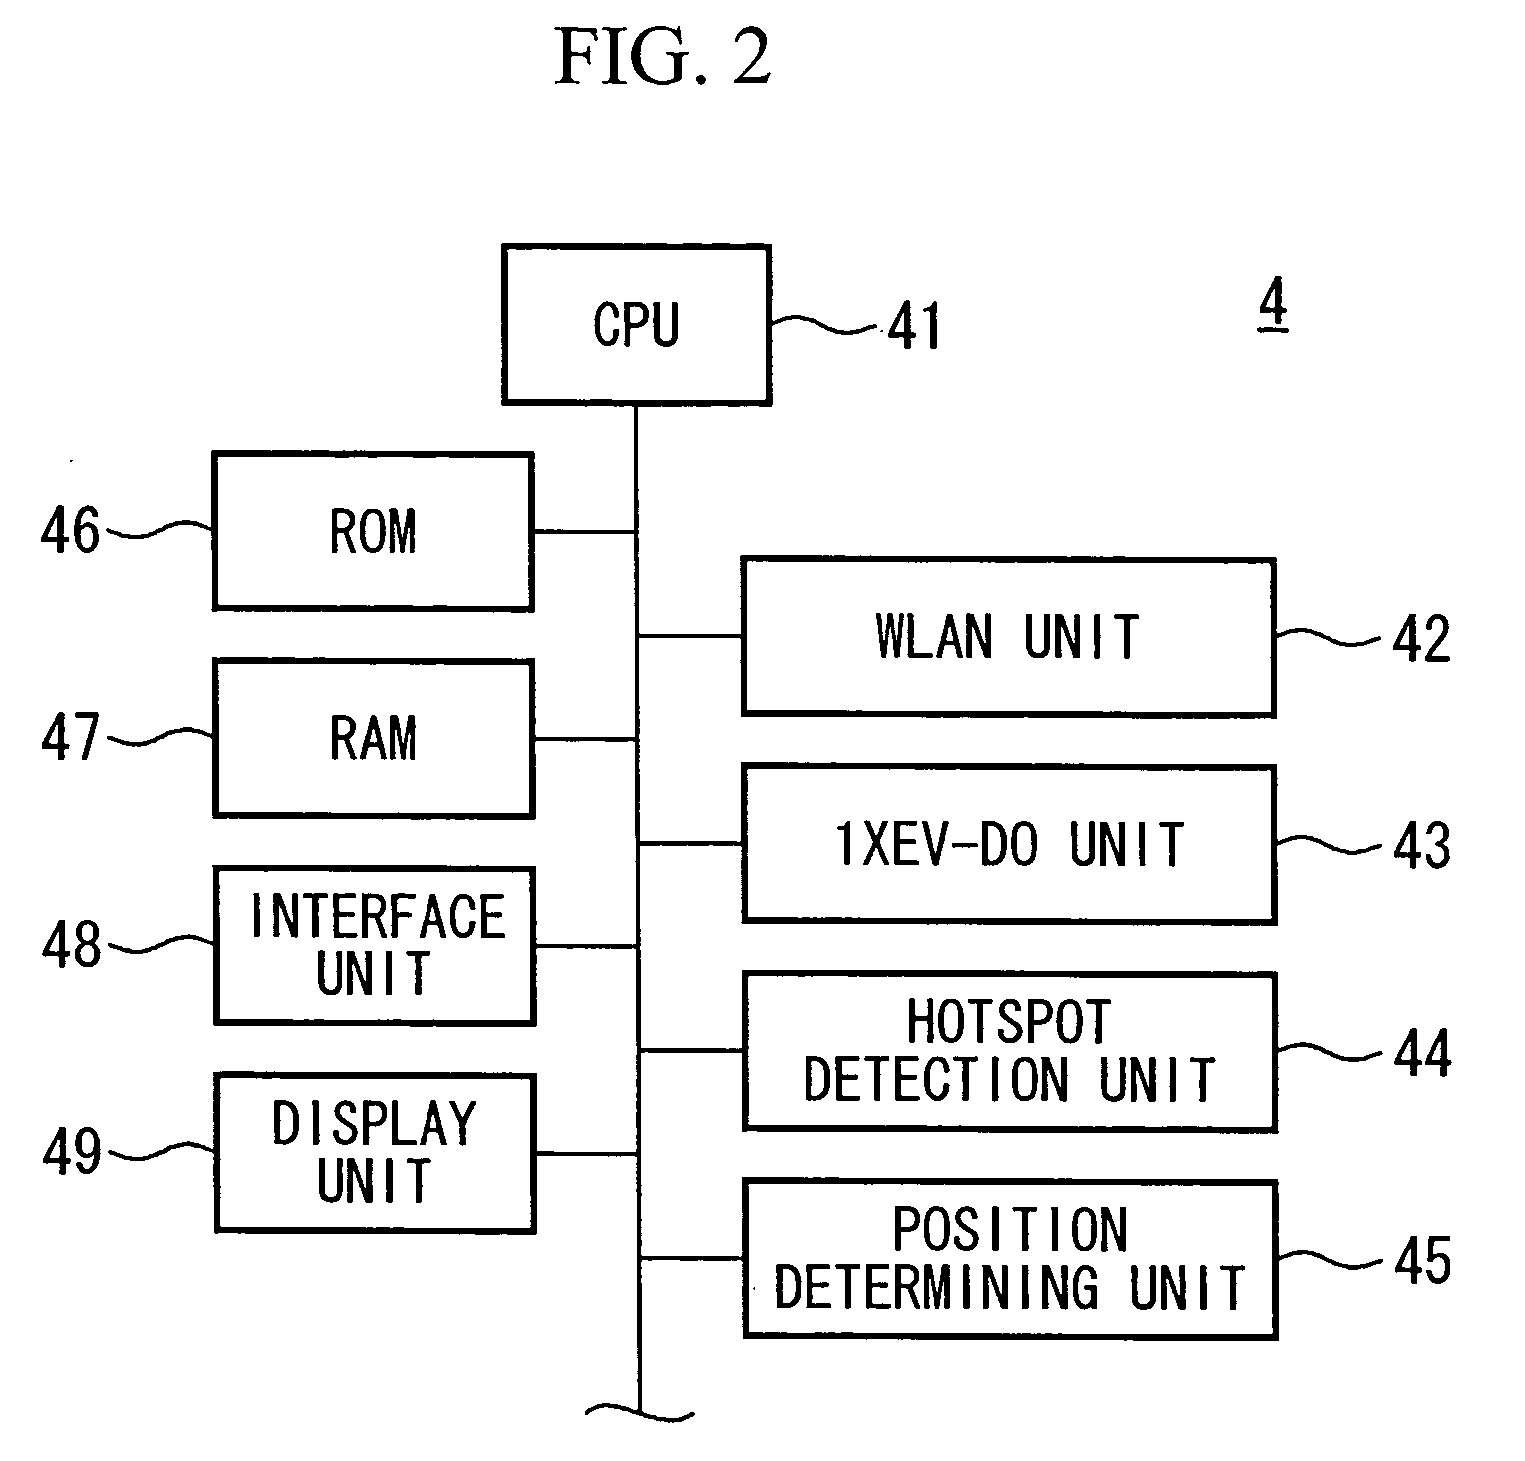 Mobile communication terminal and wireless communication system